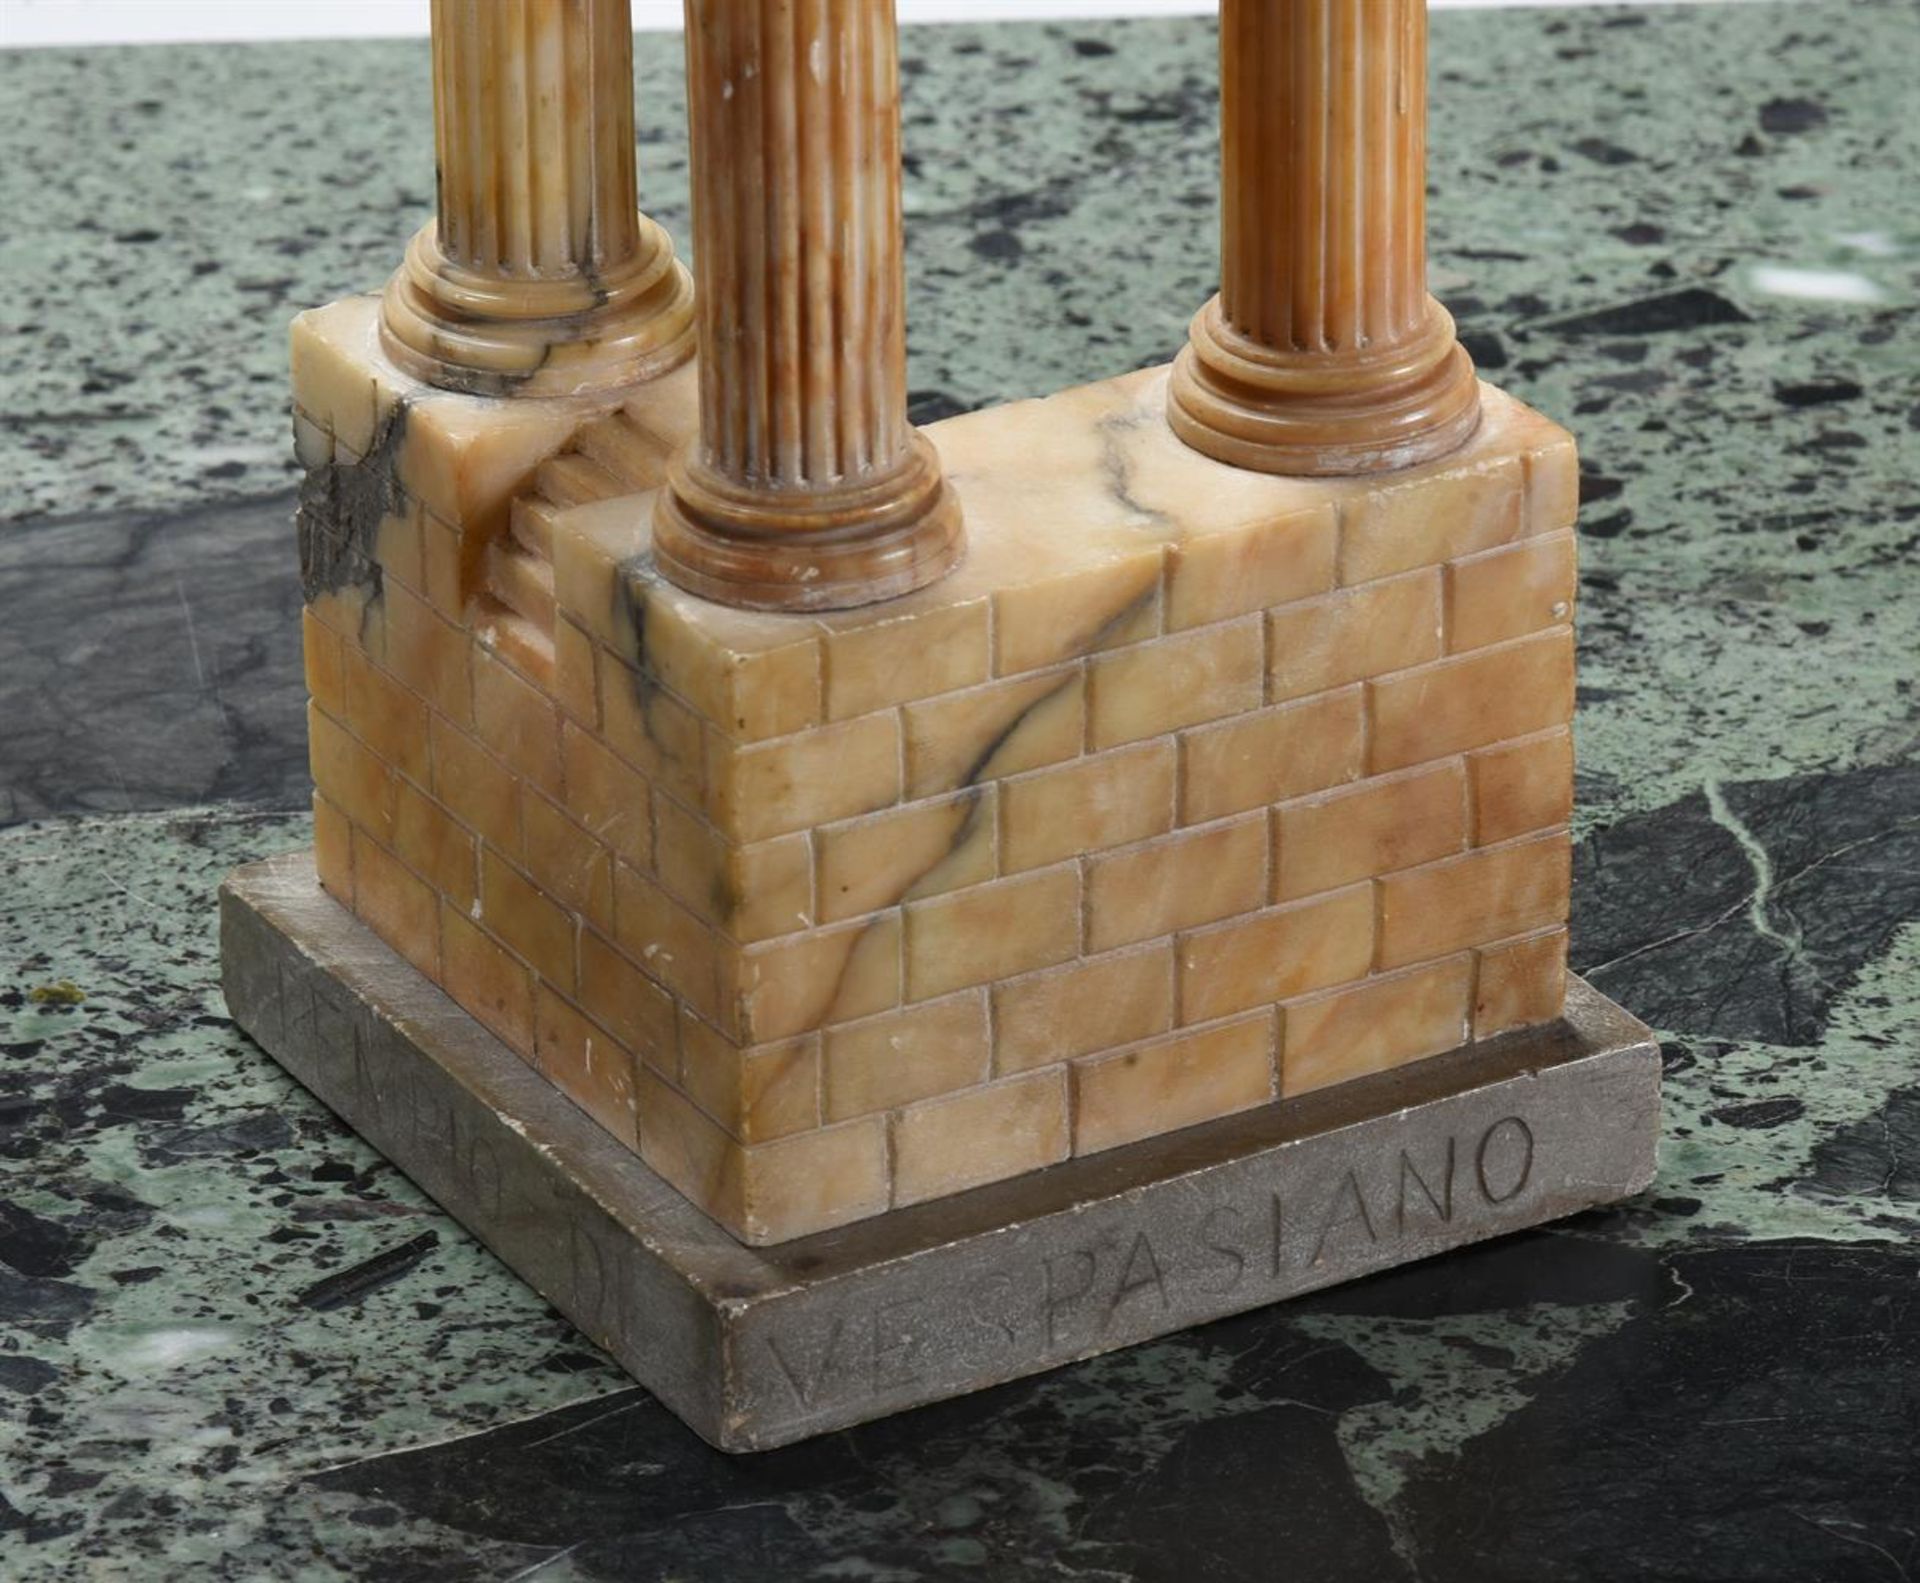 A GRAND TOUR STYLE MODEL OF THE TEMPLE OF VESPASIAN AND TITUS, ITALIAN, LATE 19TH CENTURY - Image 3 of 3